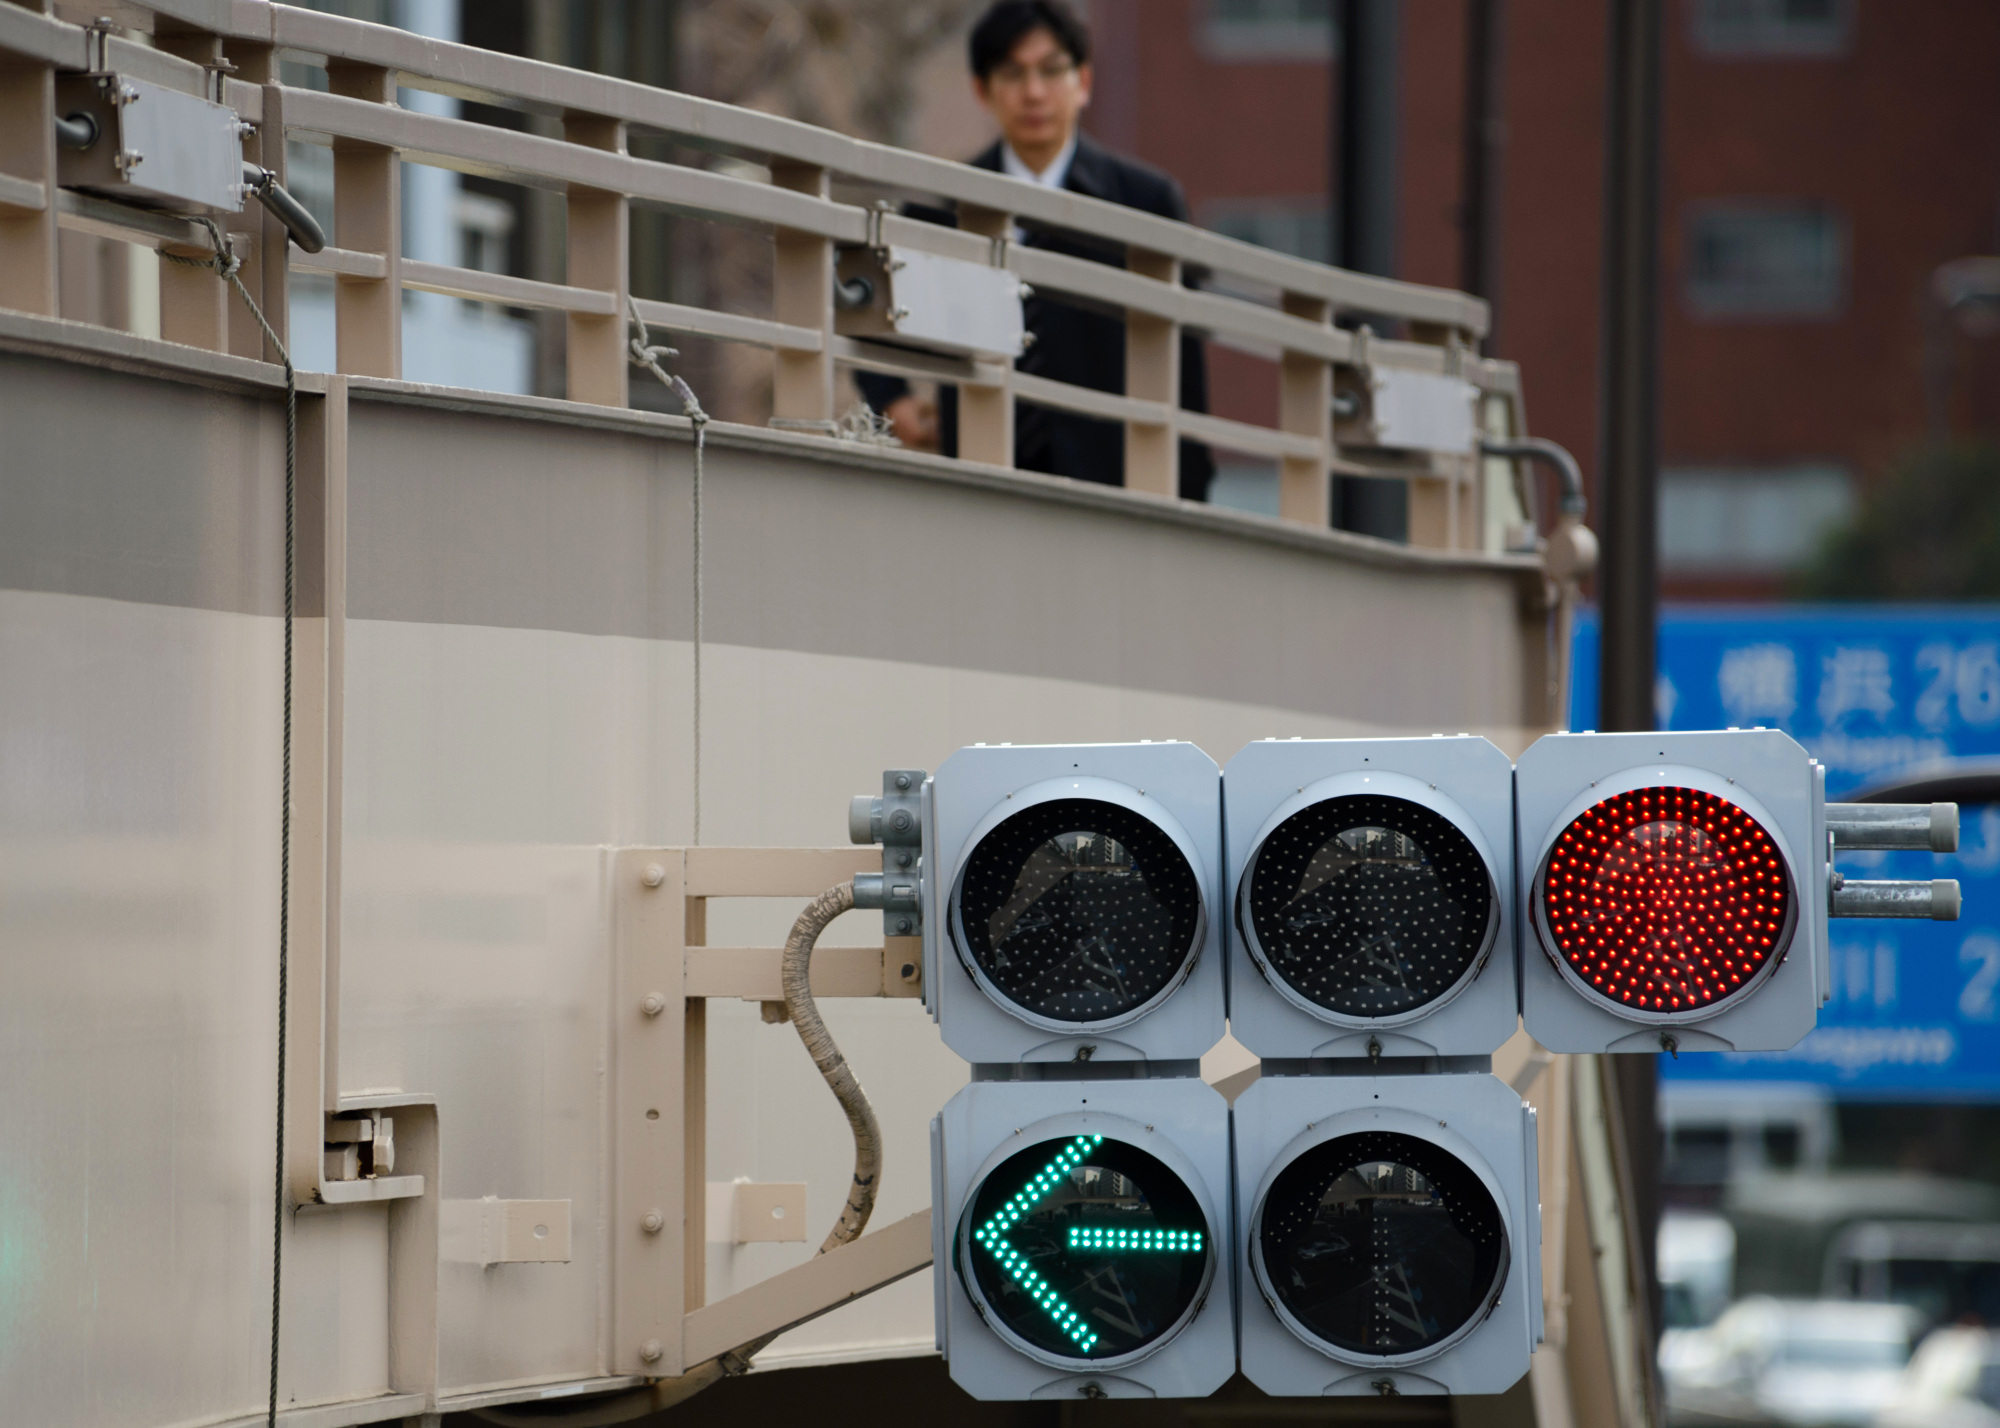 The government on Friday approved a plan to use traffic signals to set up base stations for the superfast 5G communications network. | BLOOMBERG